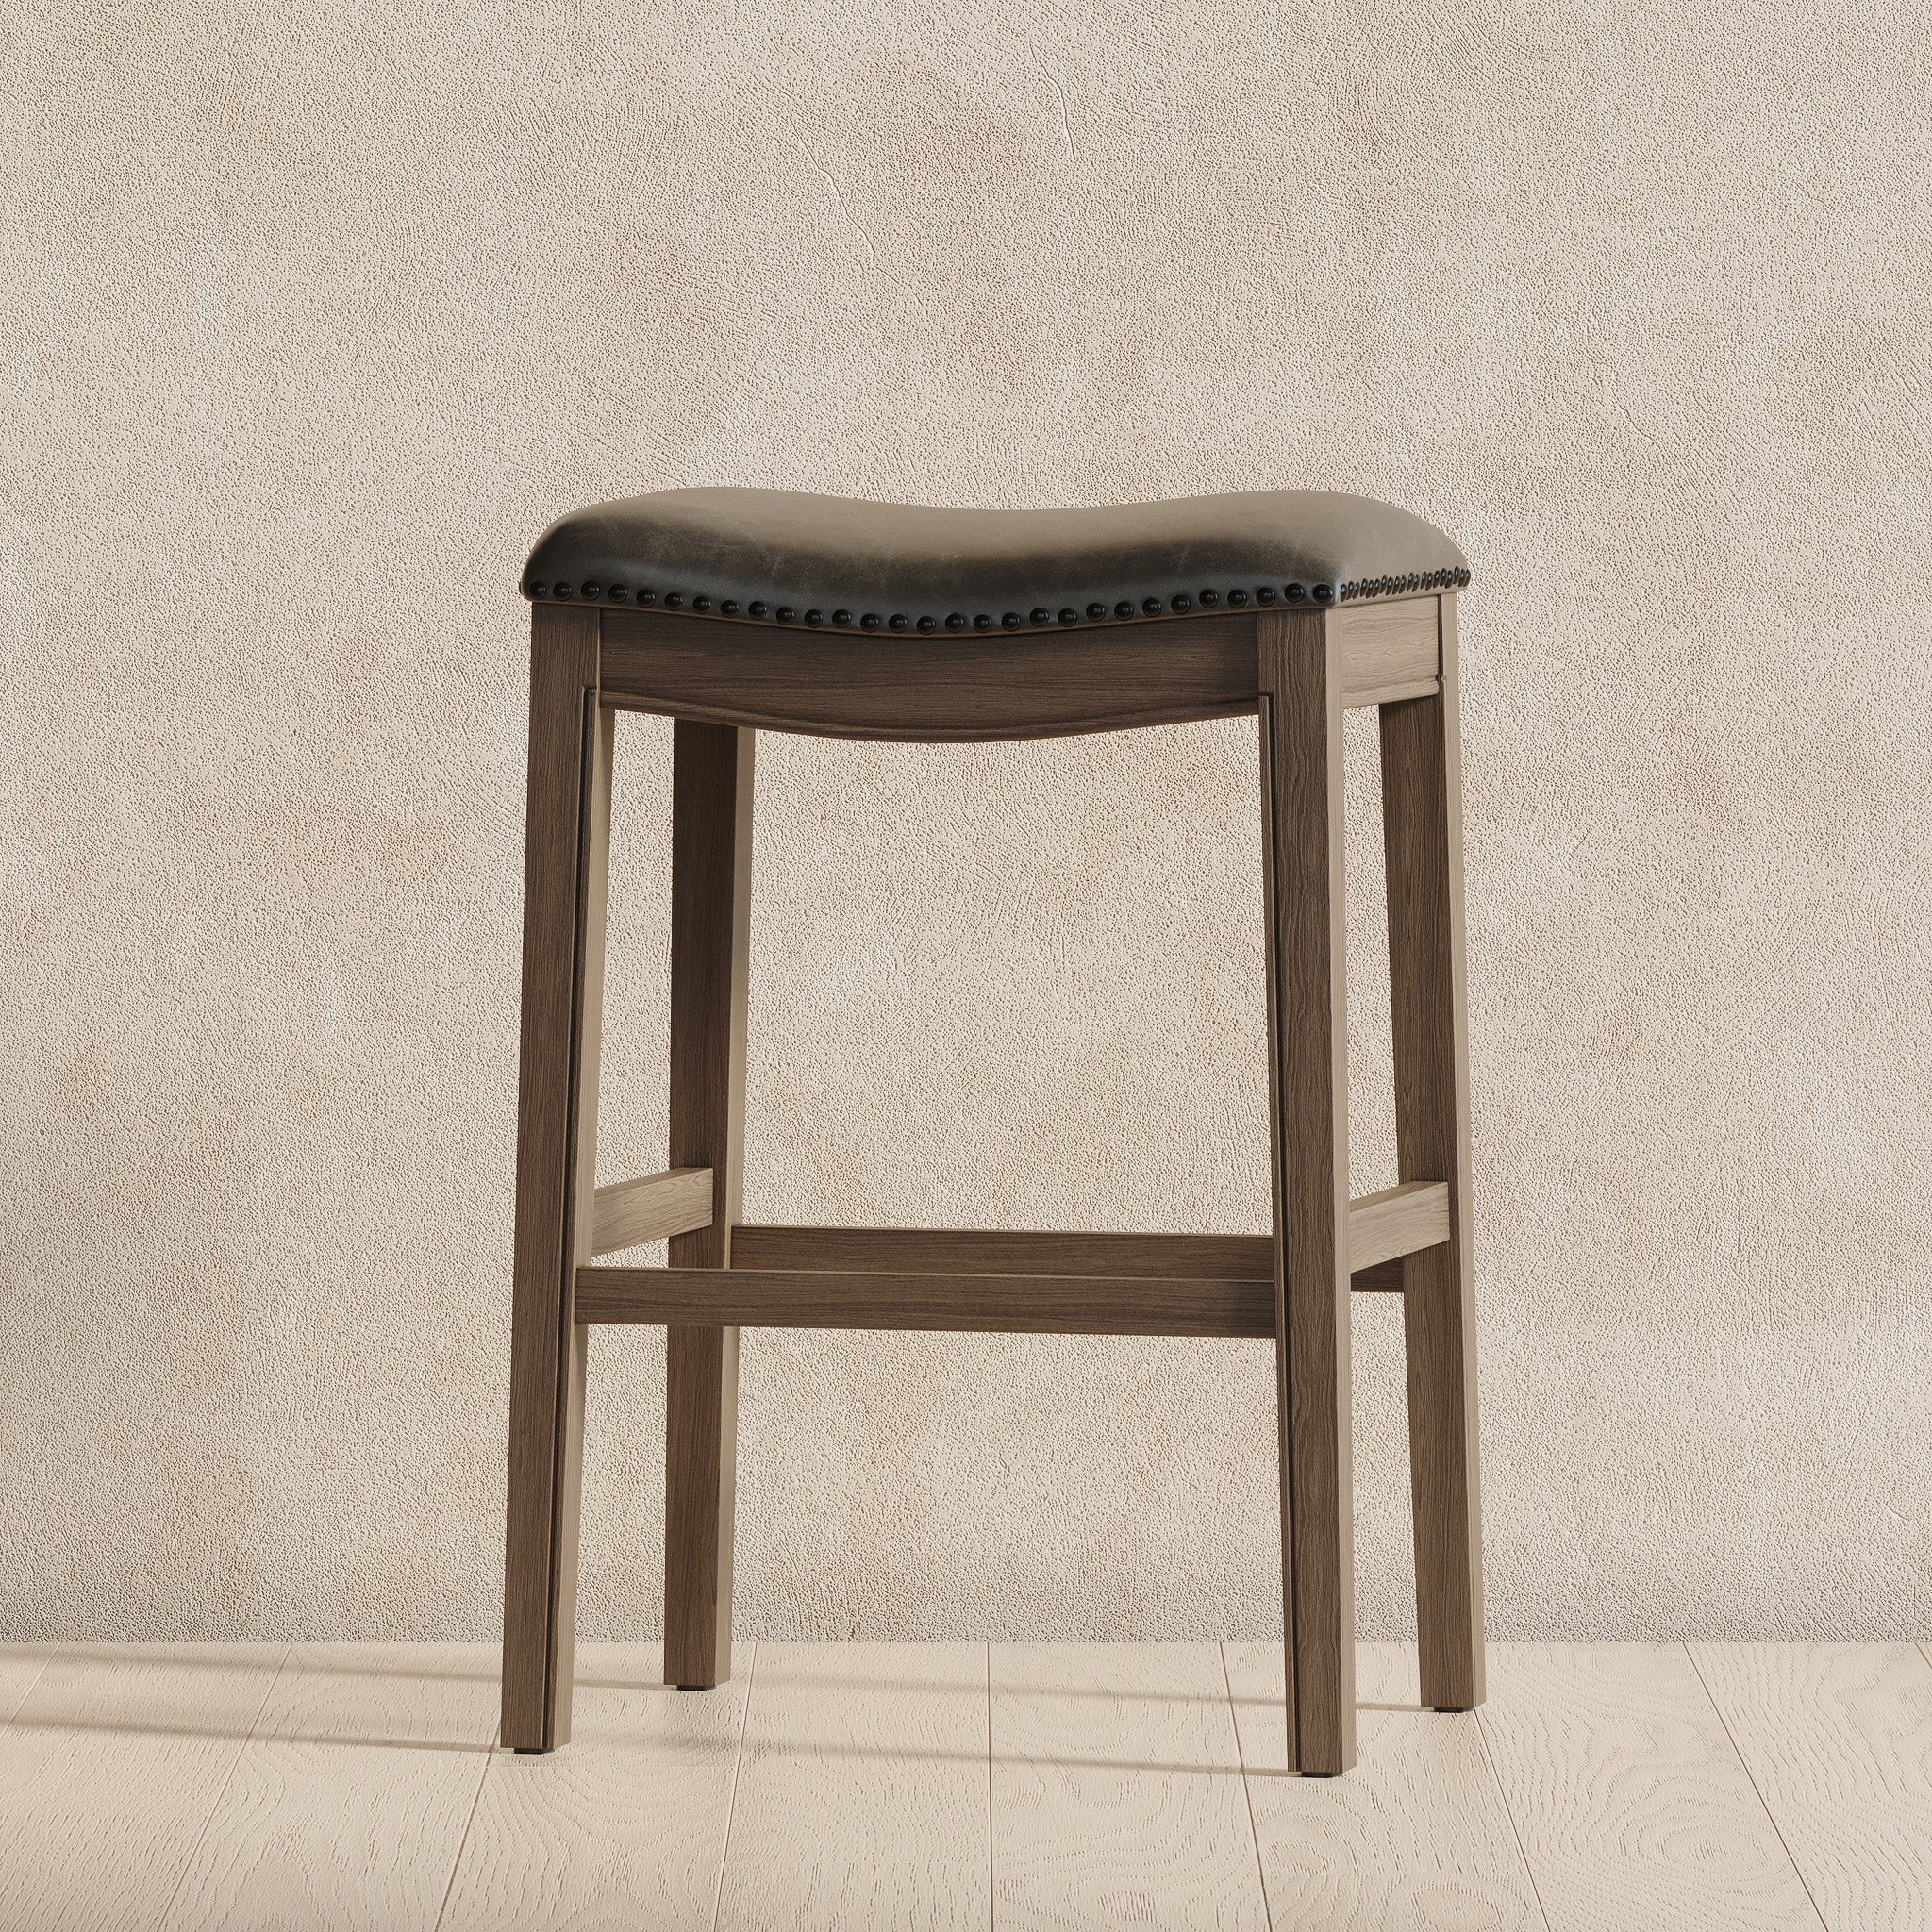 Adrien Saddle Bar Stool in Reclaimed Oak Finish with Ronan Stone Vegan Leather in Stools by Maven Lane